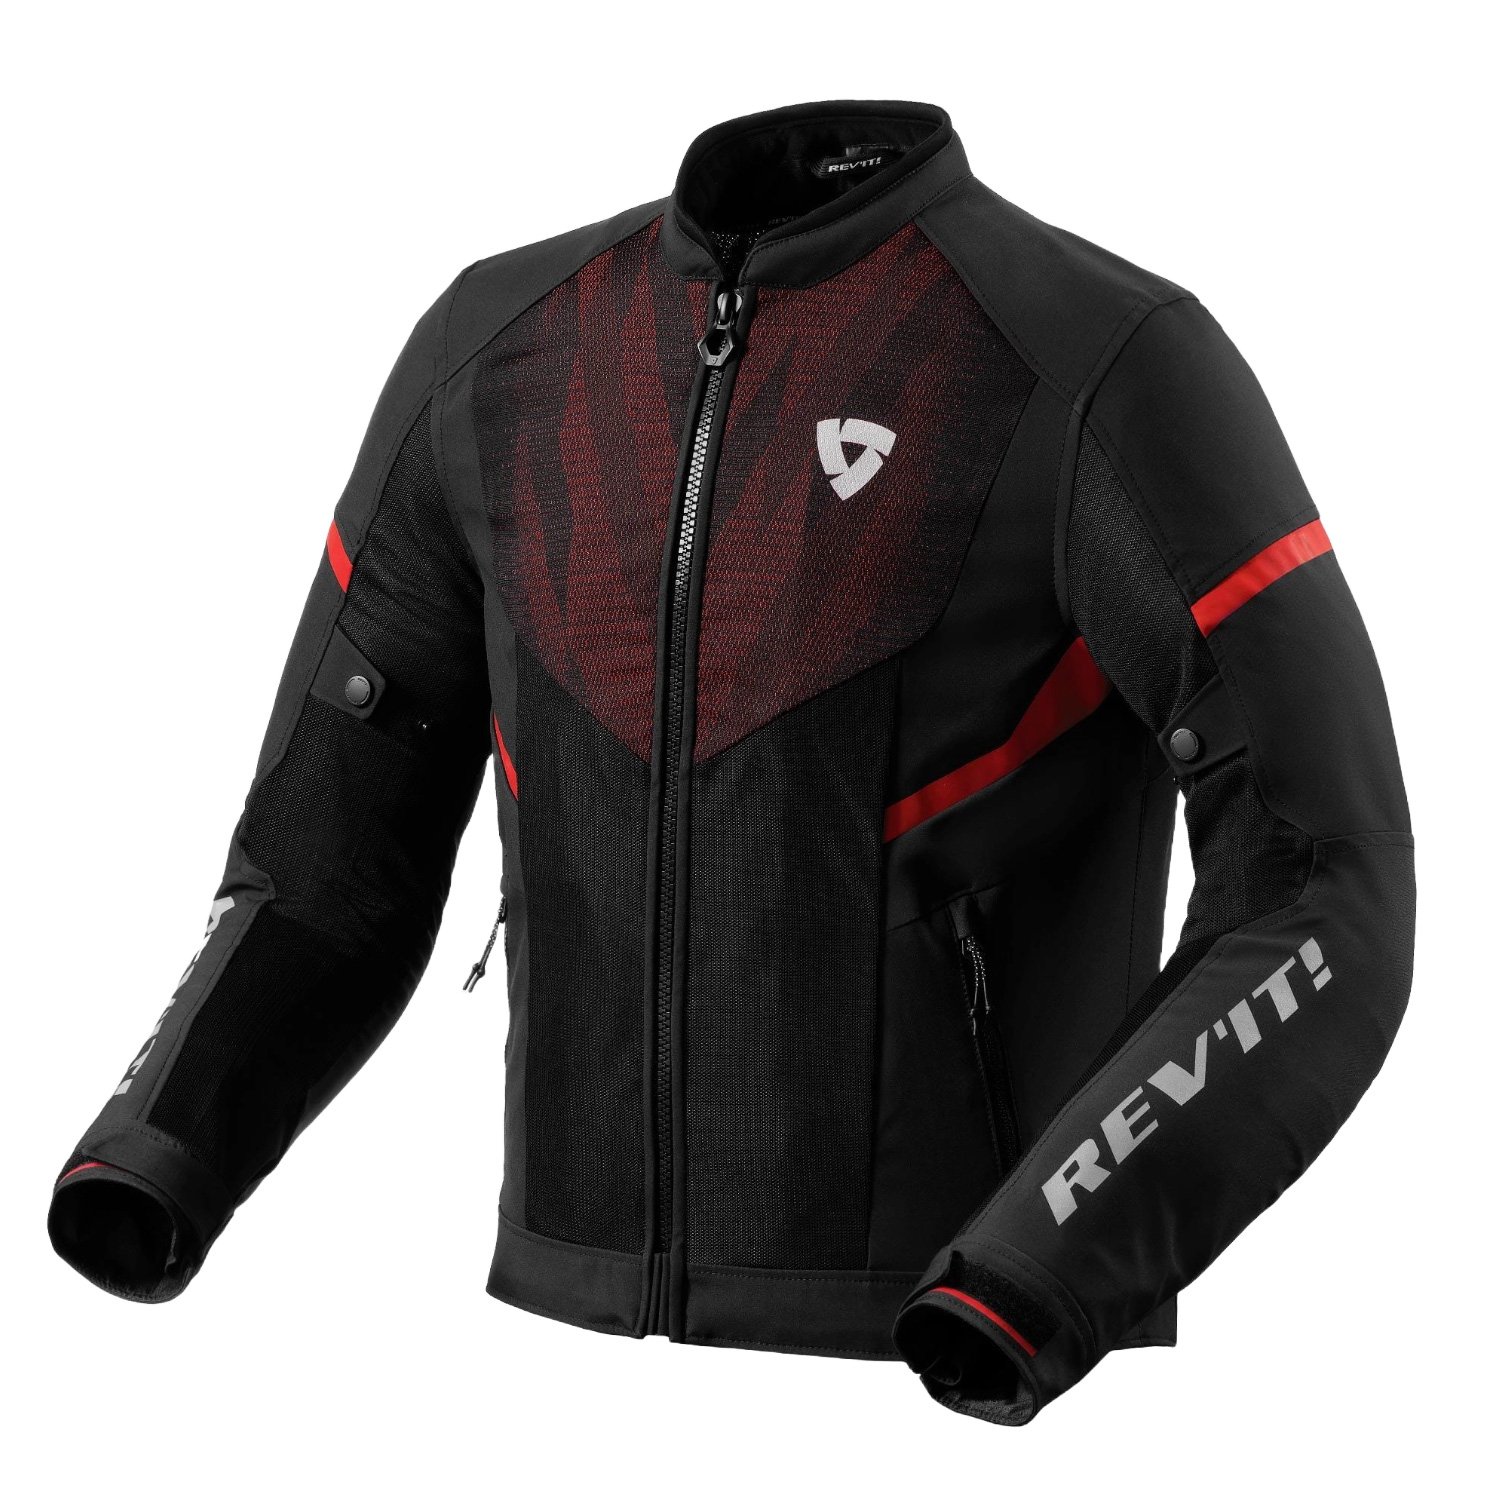 Image of REV'IT! Hyperspeed 2 GT Air Noir Neon Rouge Blouson Taille 3XL